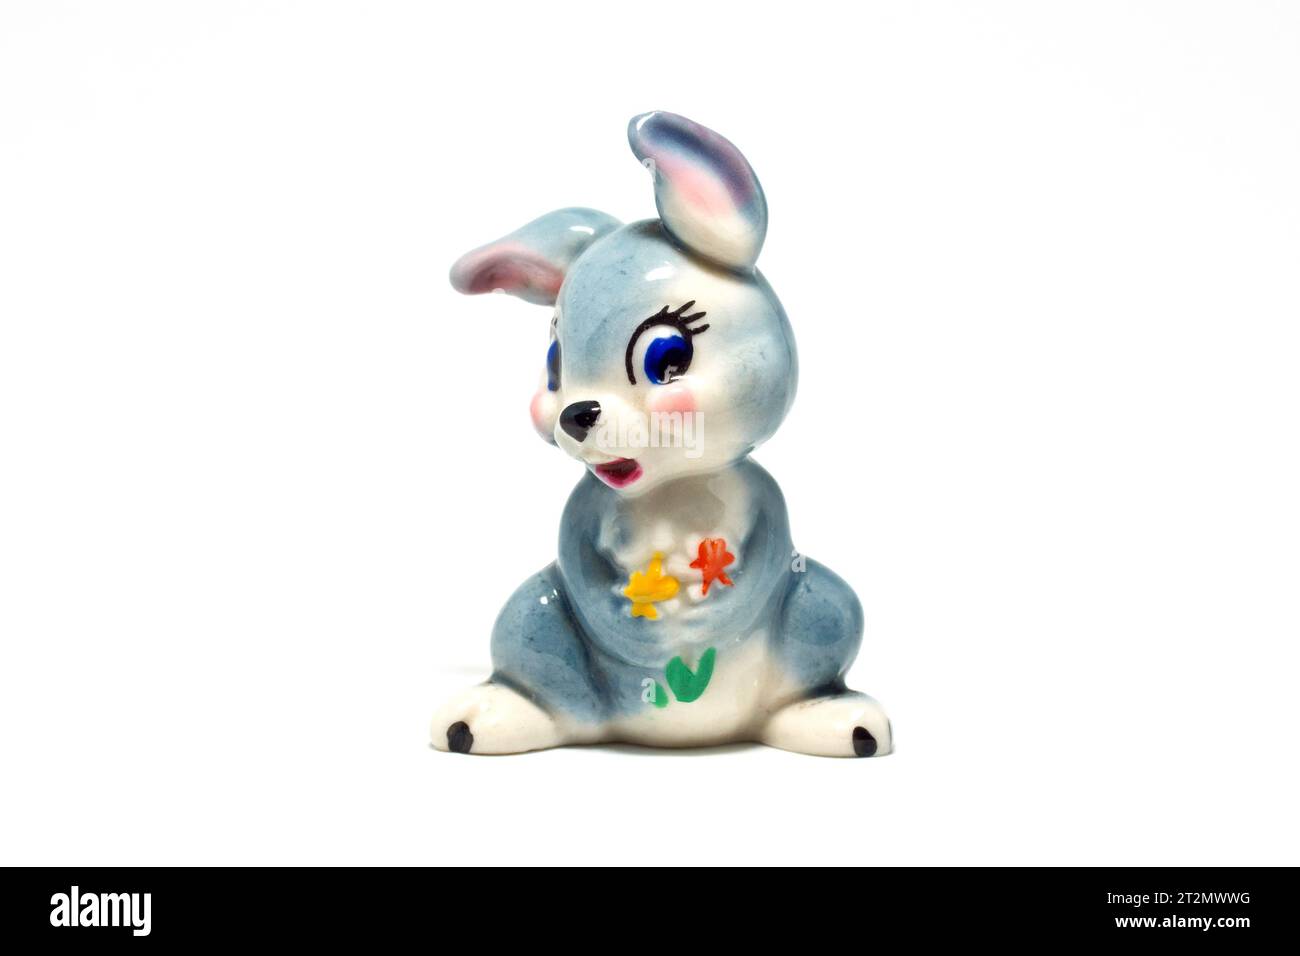 Close up of a Wade Whimsie porcelain figurine of Thumper the rabbit from Disney's animated movie Bambi, isolated against a white background. Stock Photo